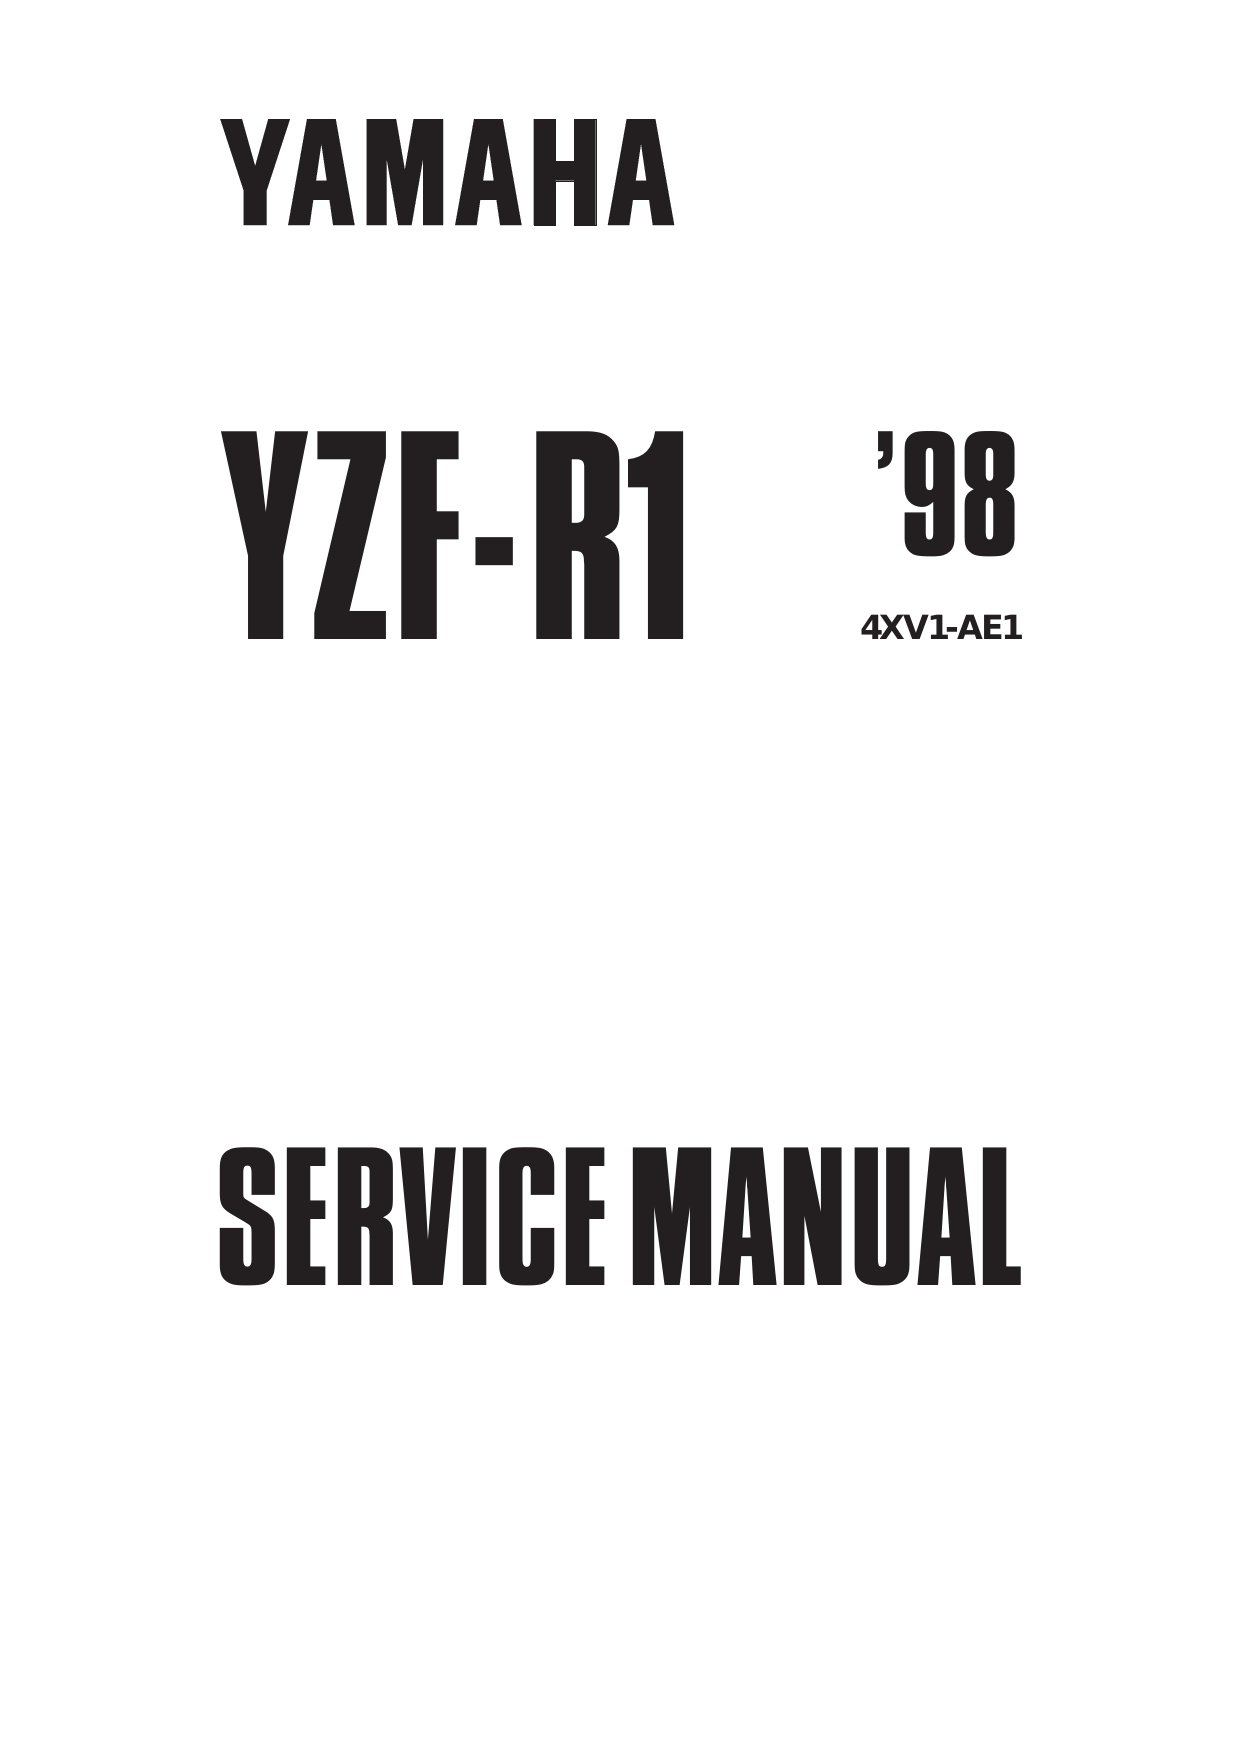 1998-2002 Yamaha YZF-R1 service manual Preview image 1